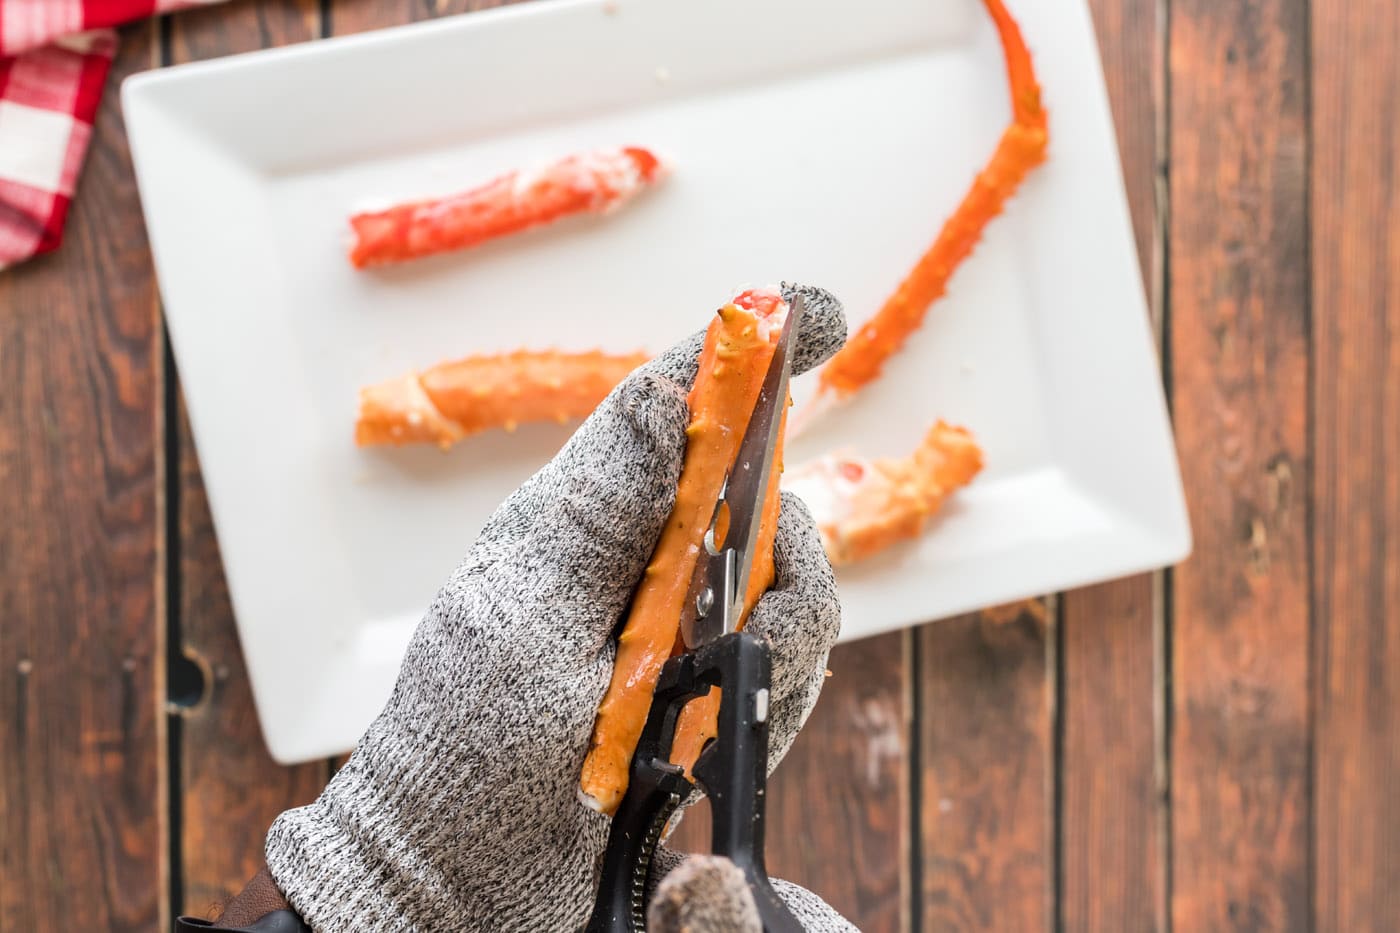 using kitchean shears to cut open crab legs